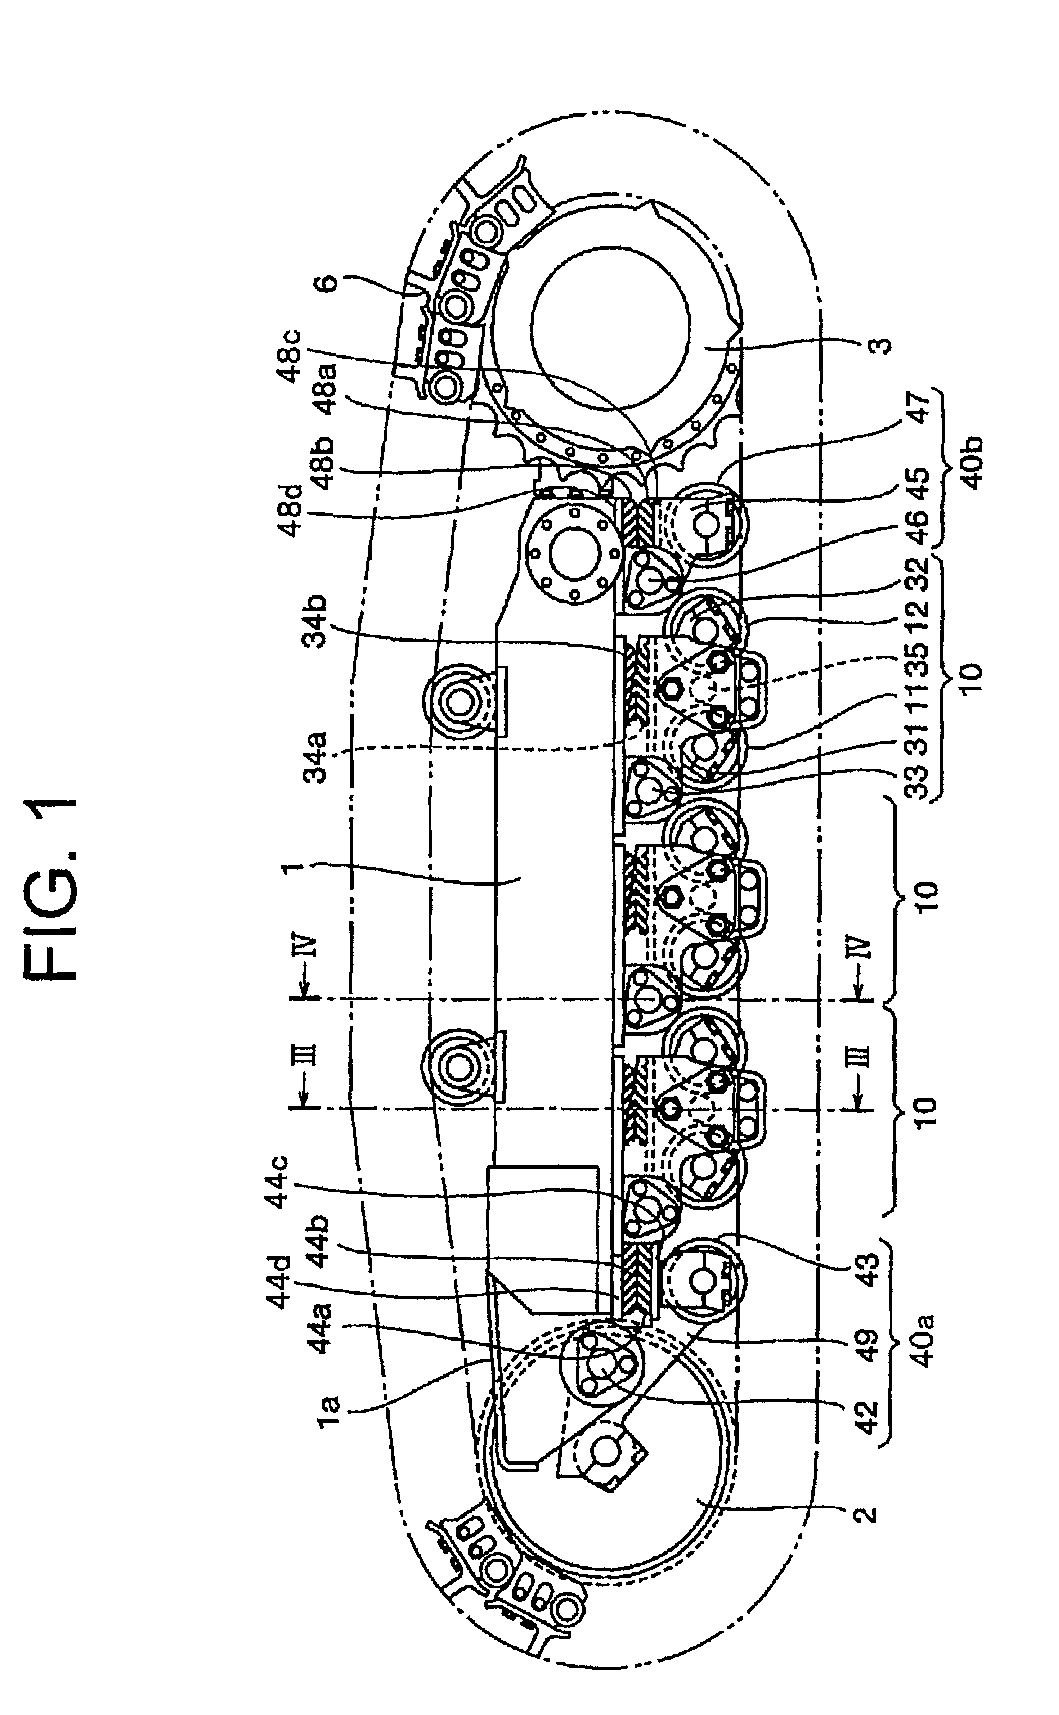 Running device for track-laying vehicle